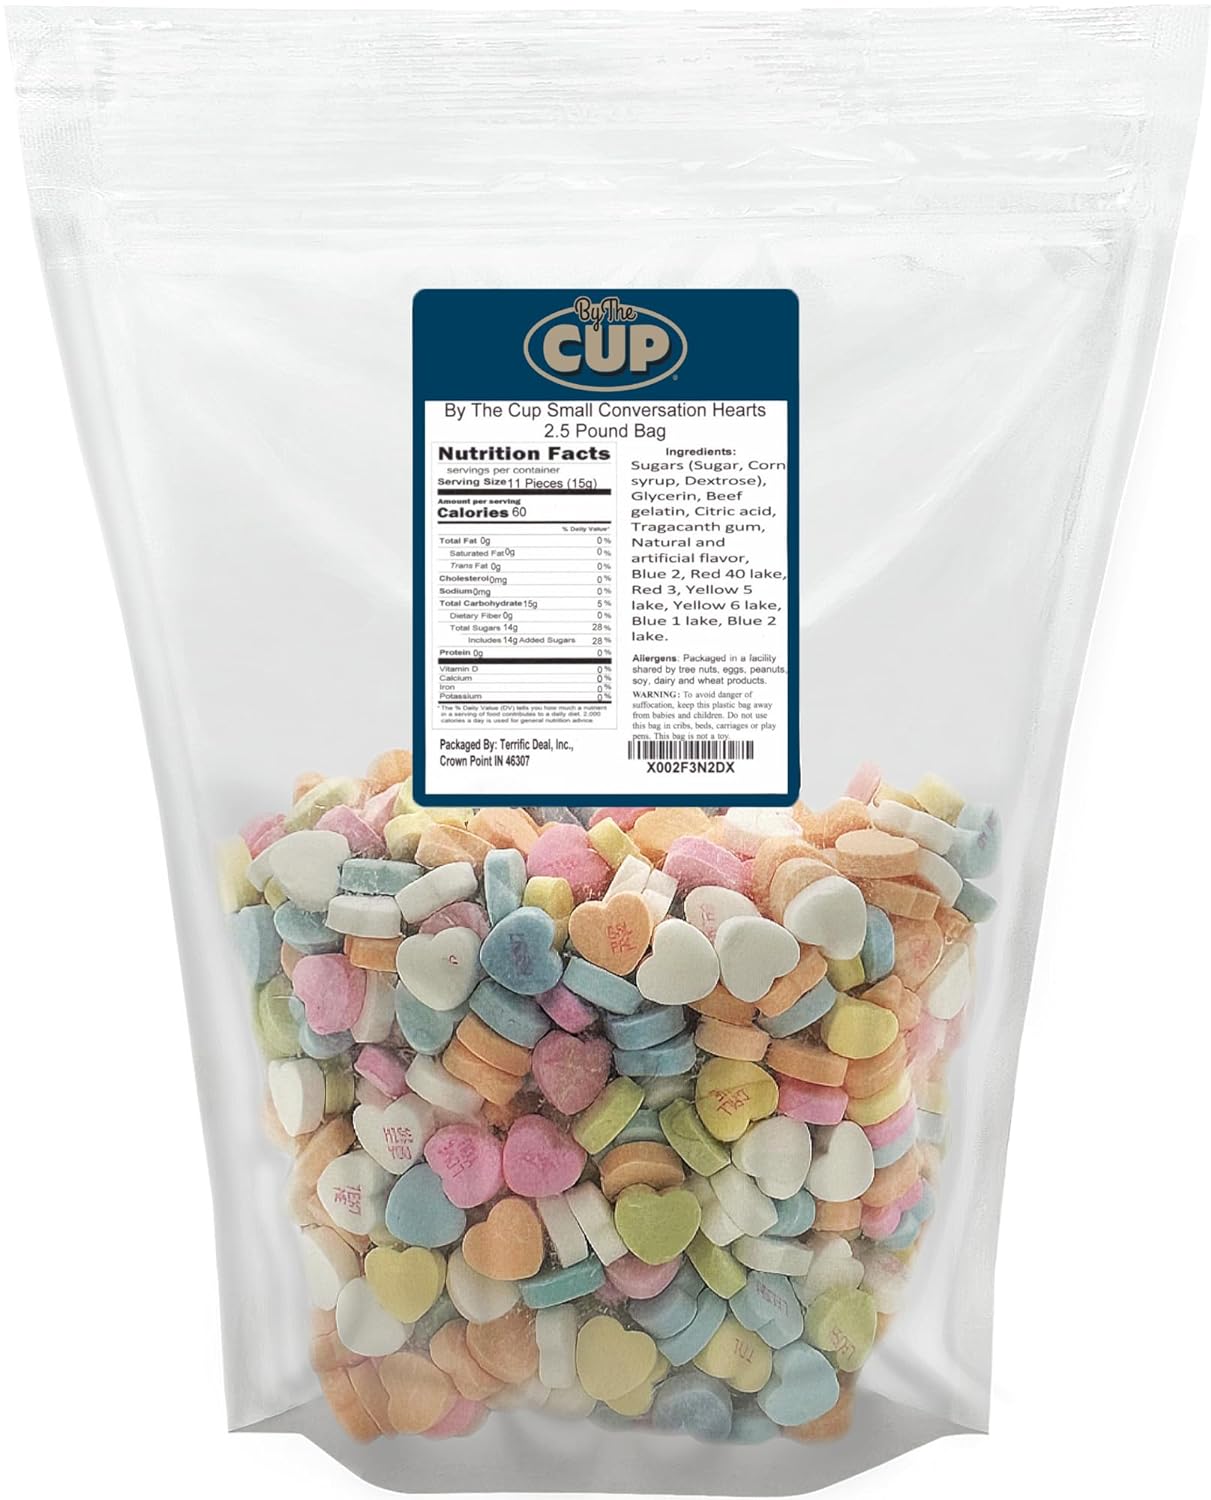 Small Candy Conversation Hearts, 2.5 Pound By The Cup Bag